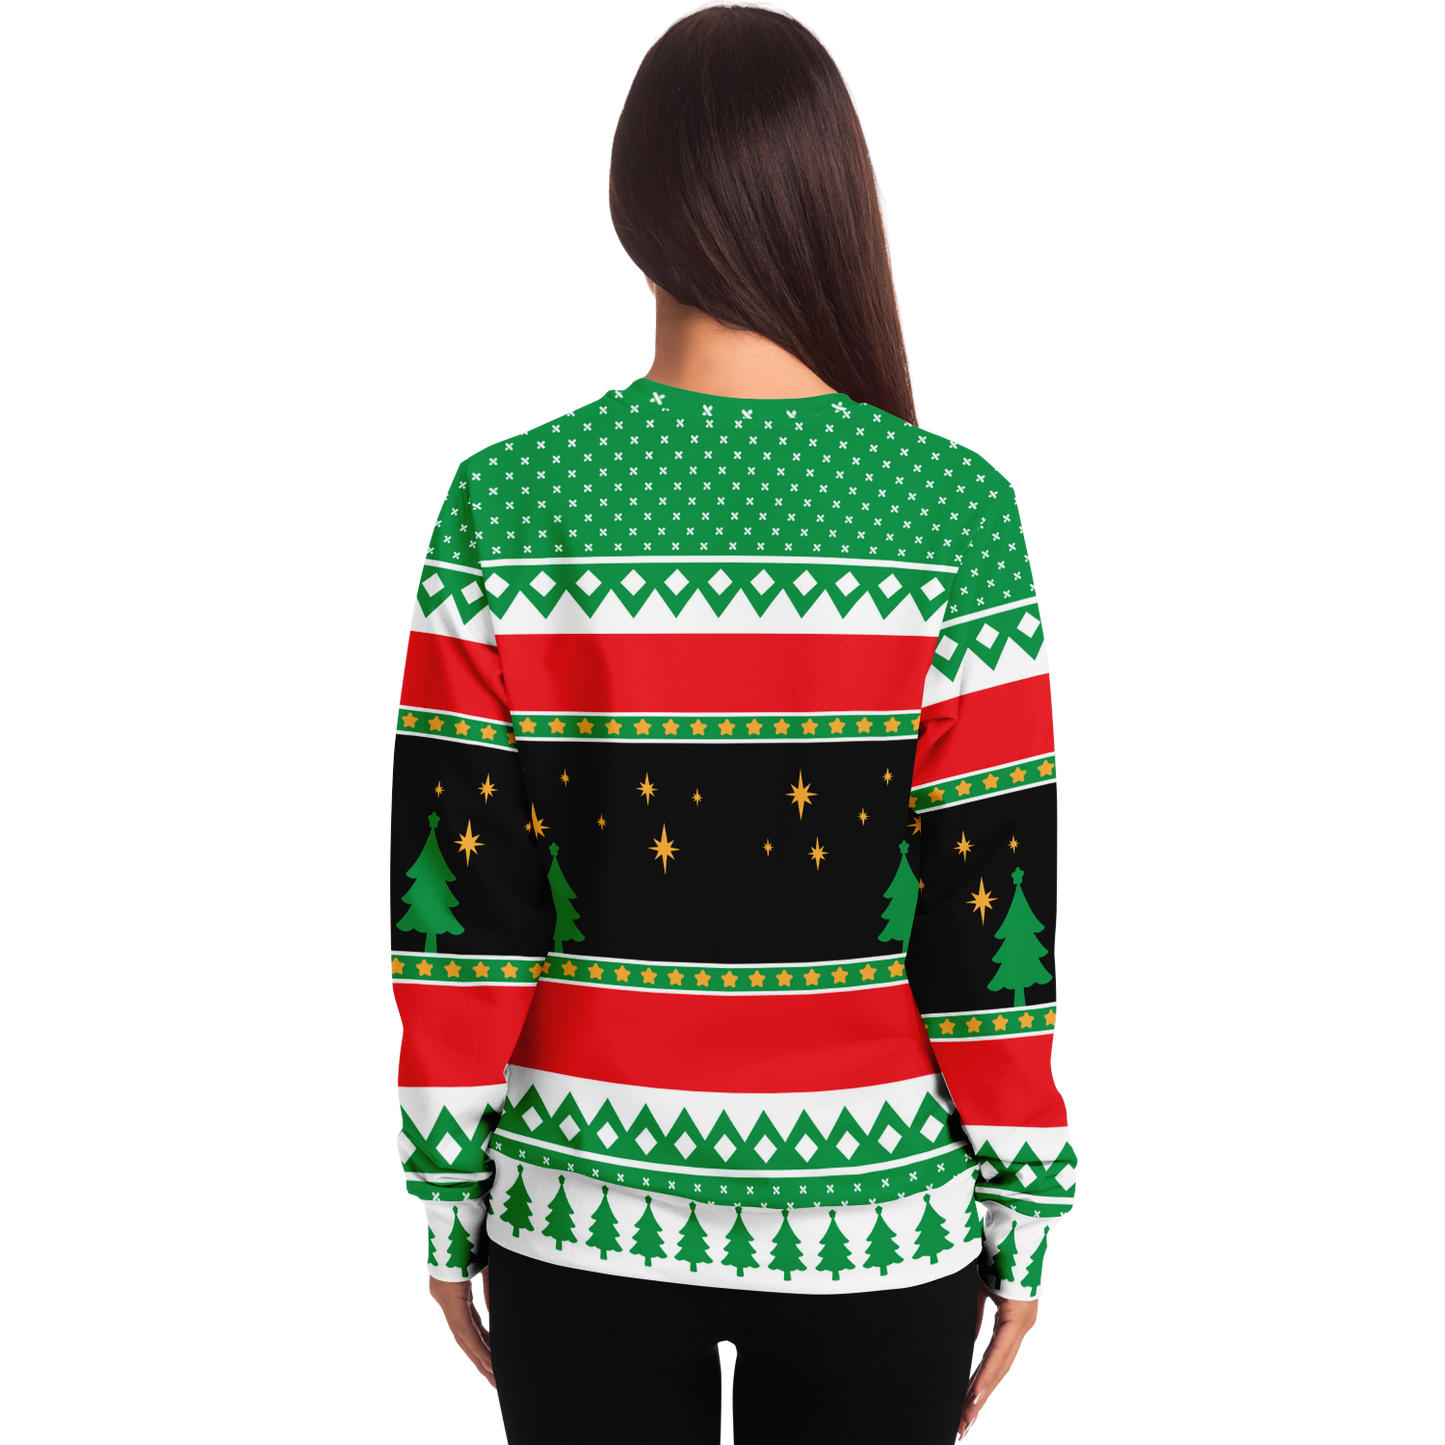 Knit Printed Christmas Sweater